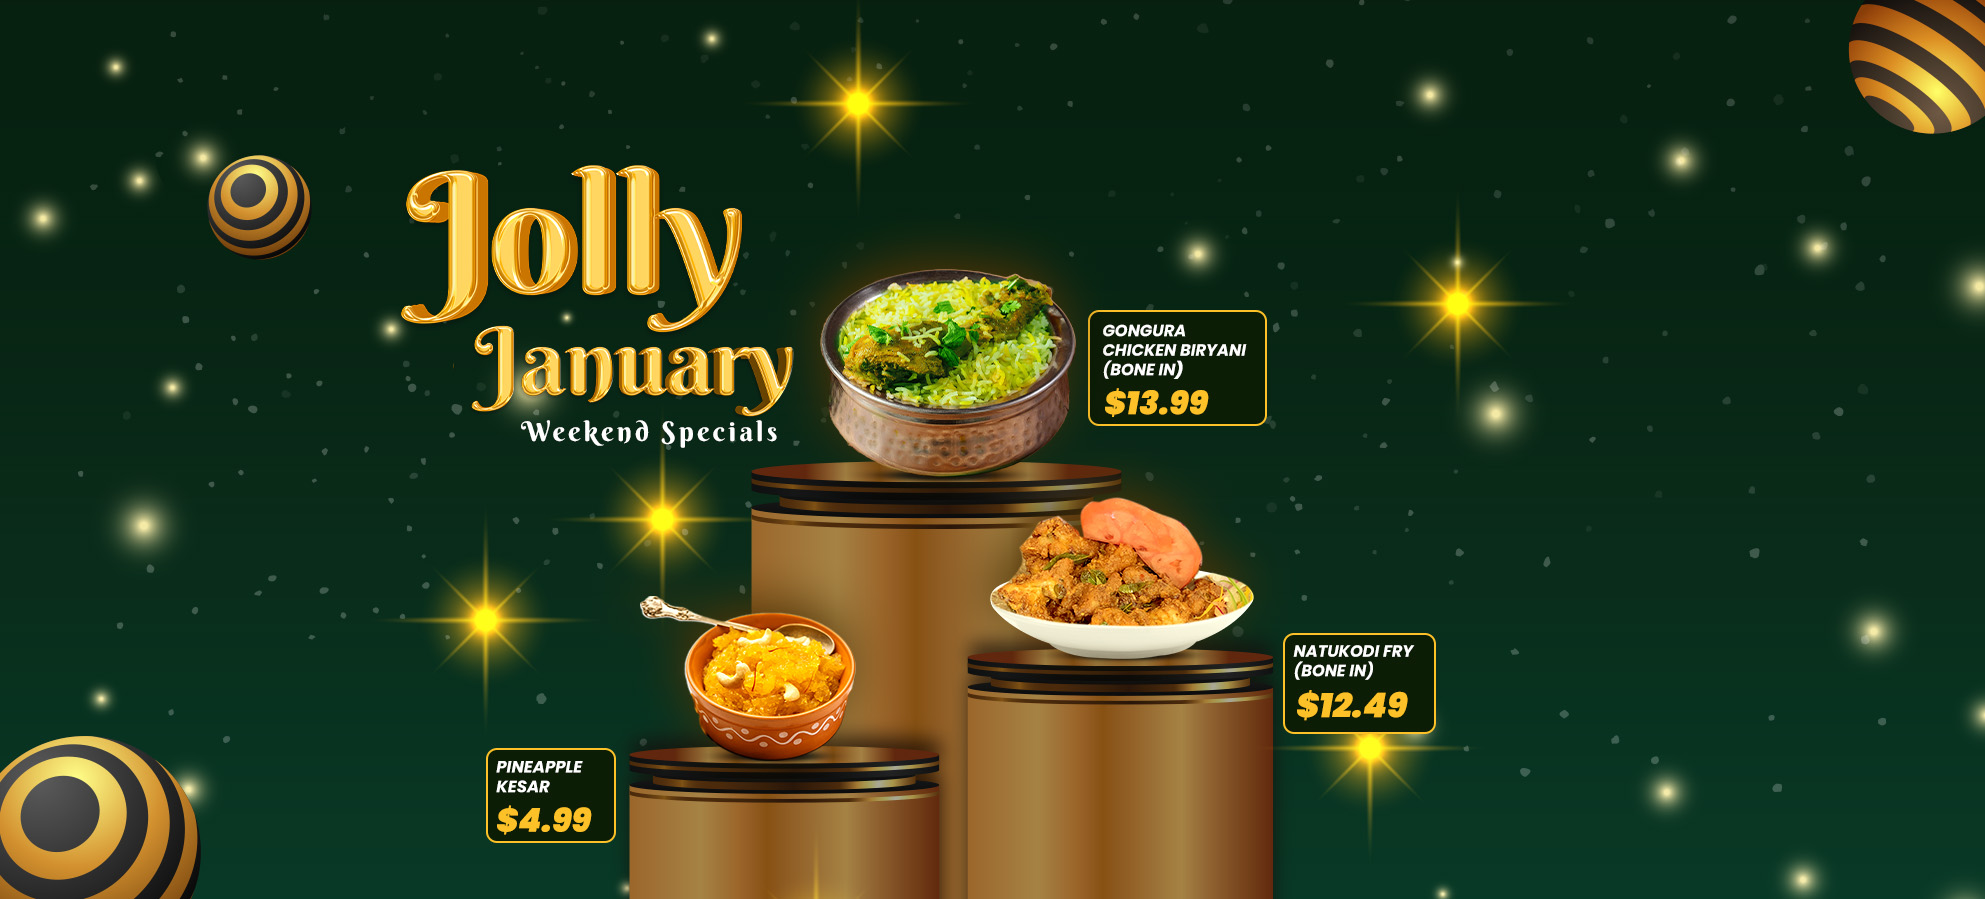 Jolly January Weekend Specials